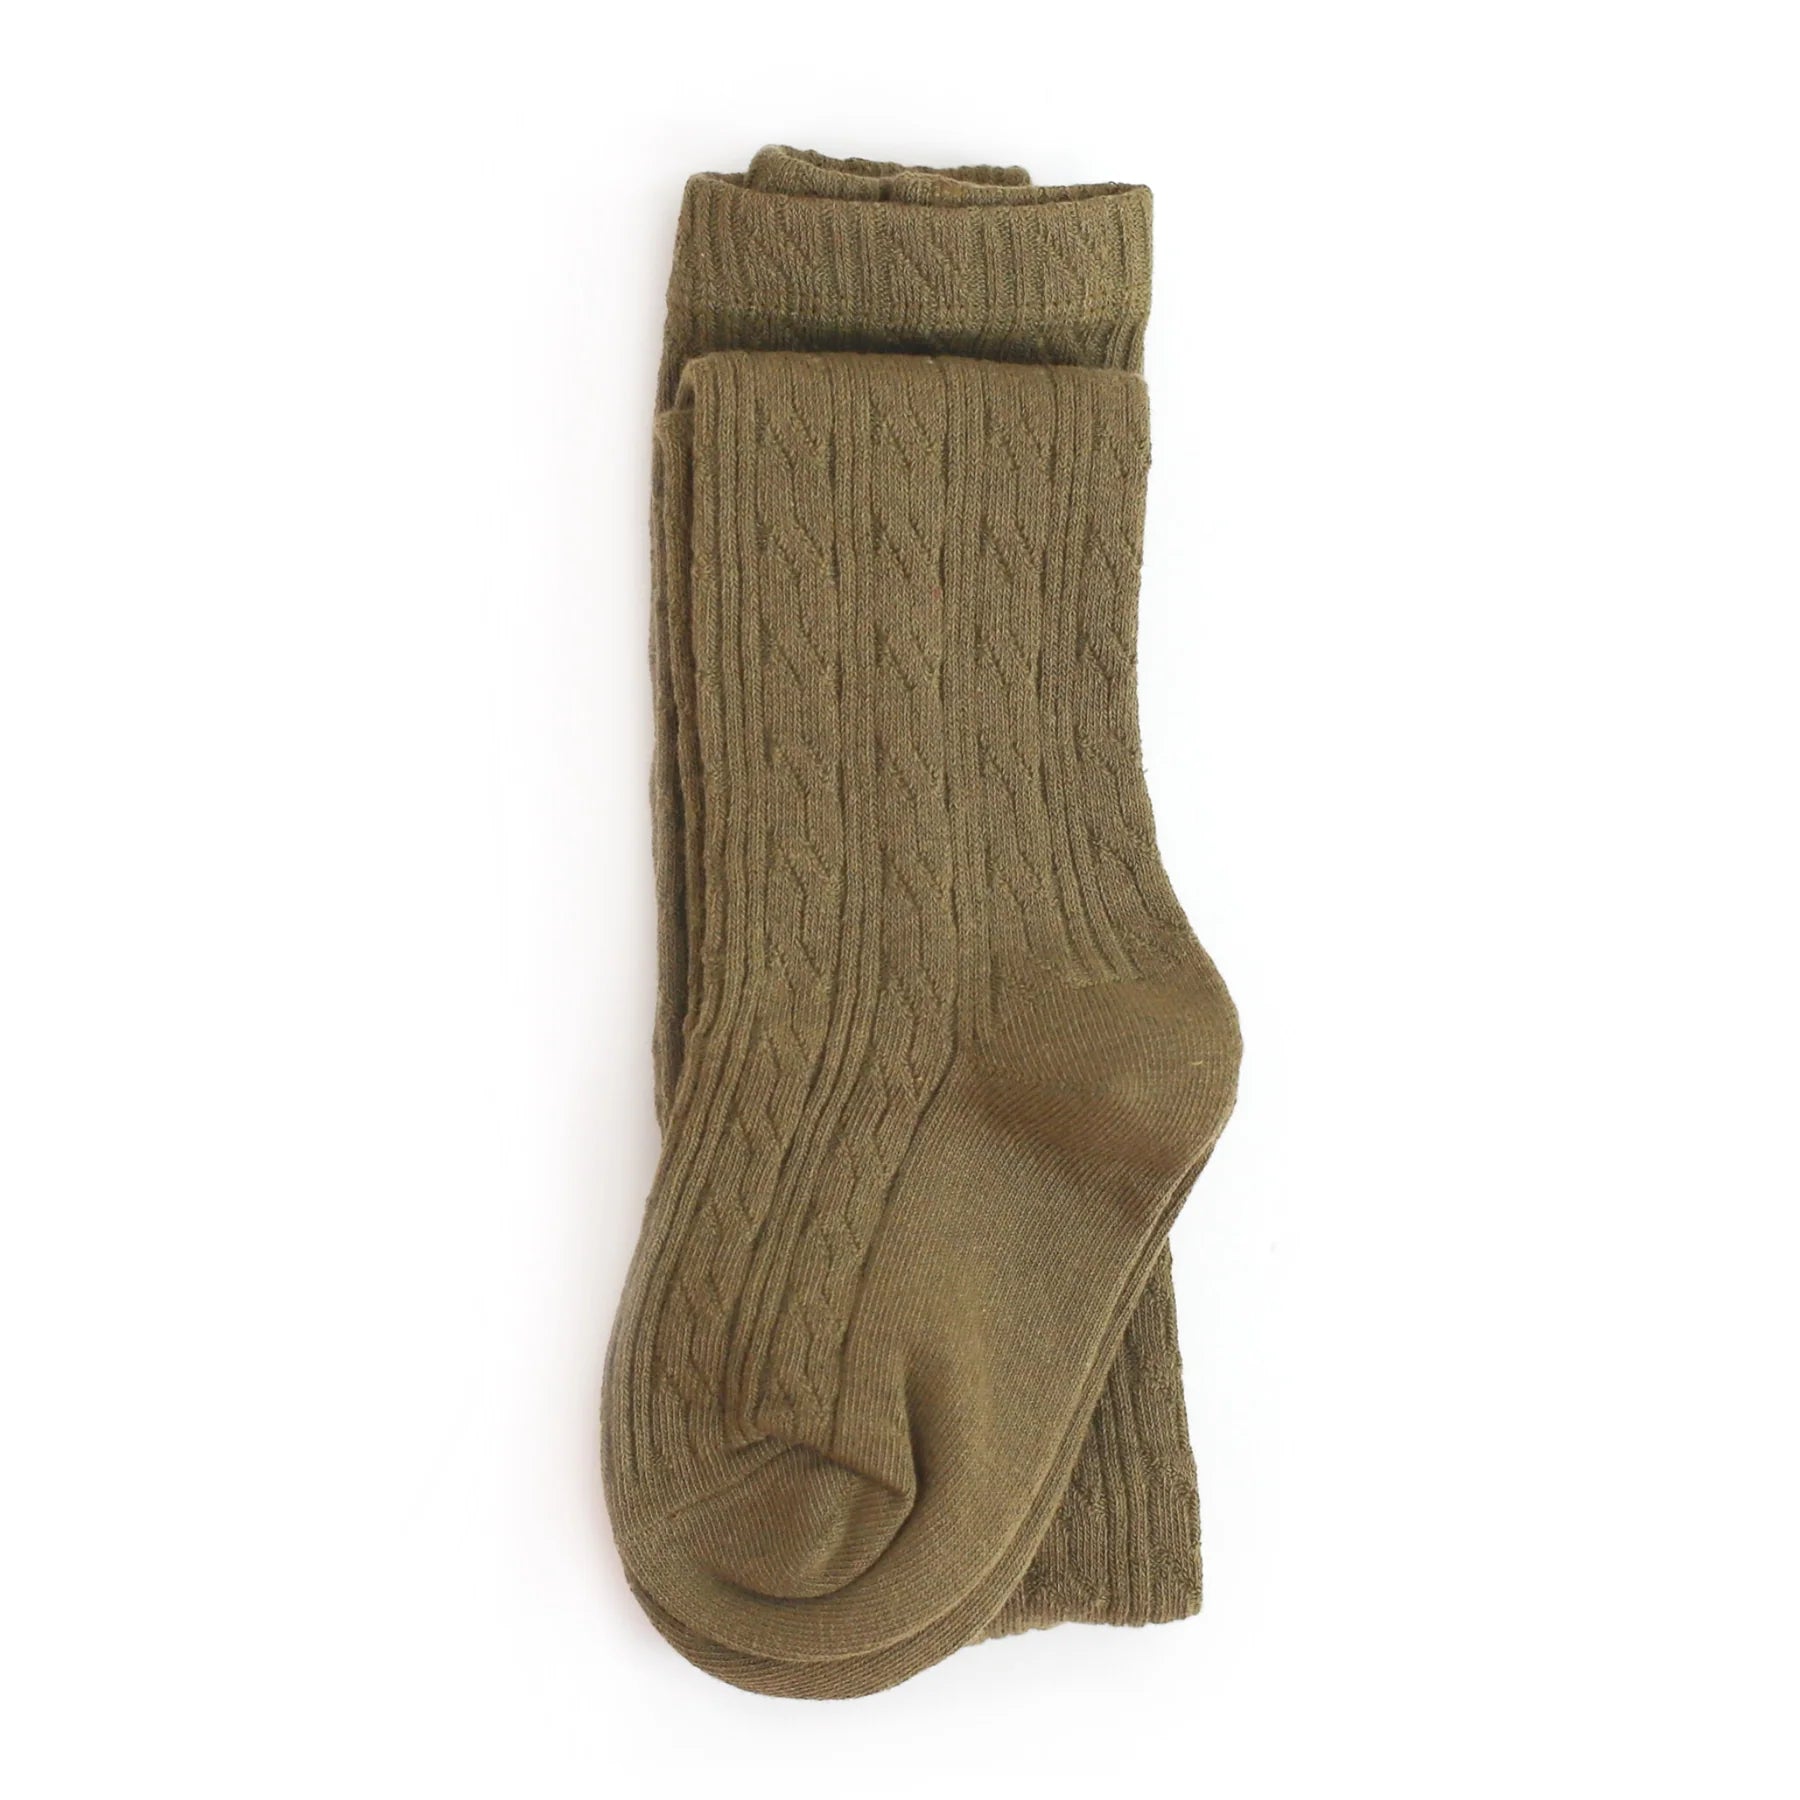 The Little Stocking Co - Cable Knit Tights - Olive Green